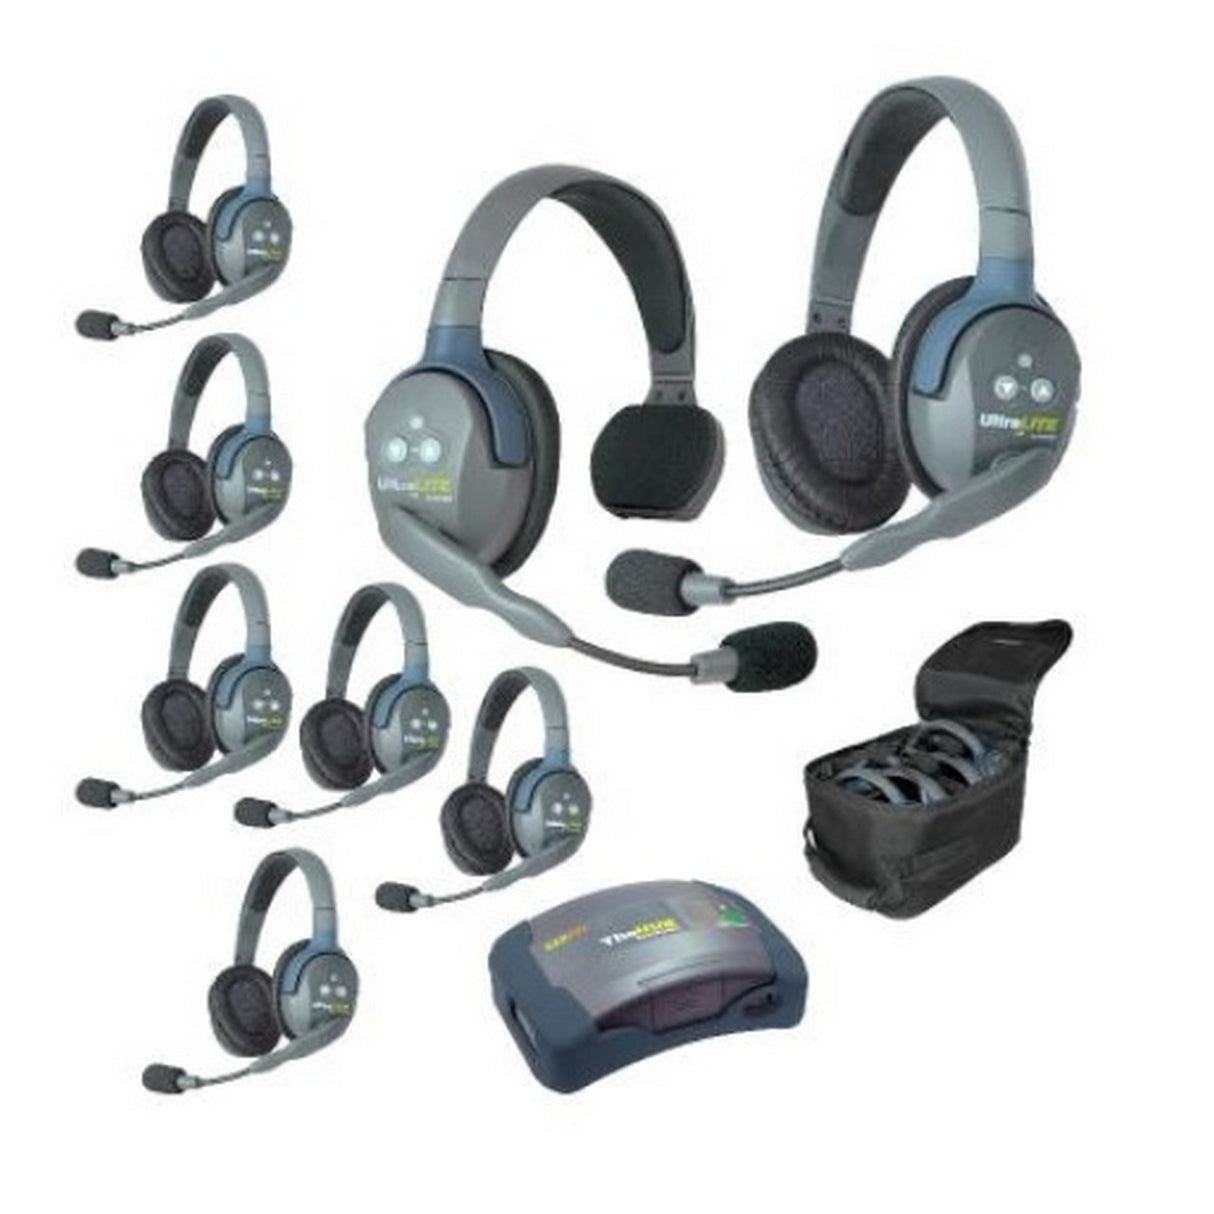 Eartec HUB817 8-Person Full Duplex Wireless Intercom with 1 Single and 7 Double Ear Headsets